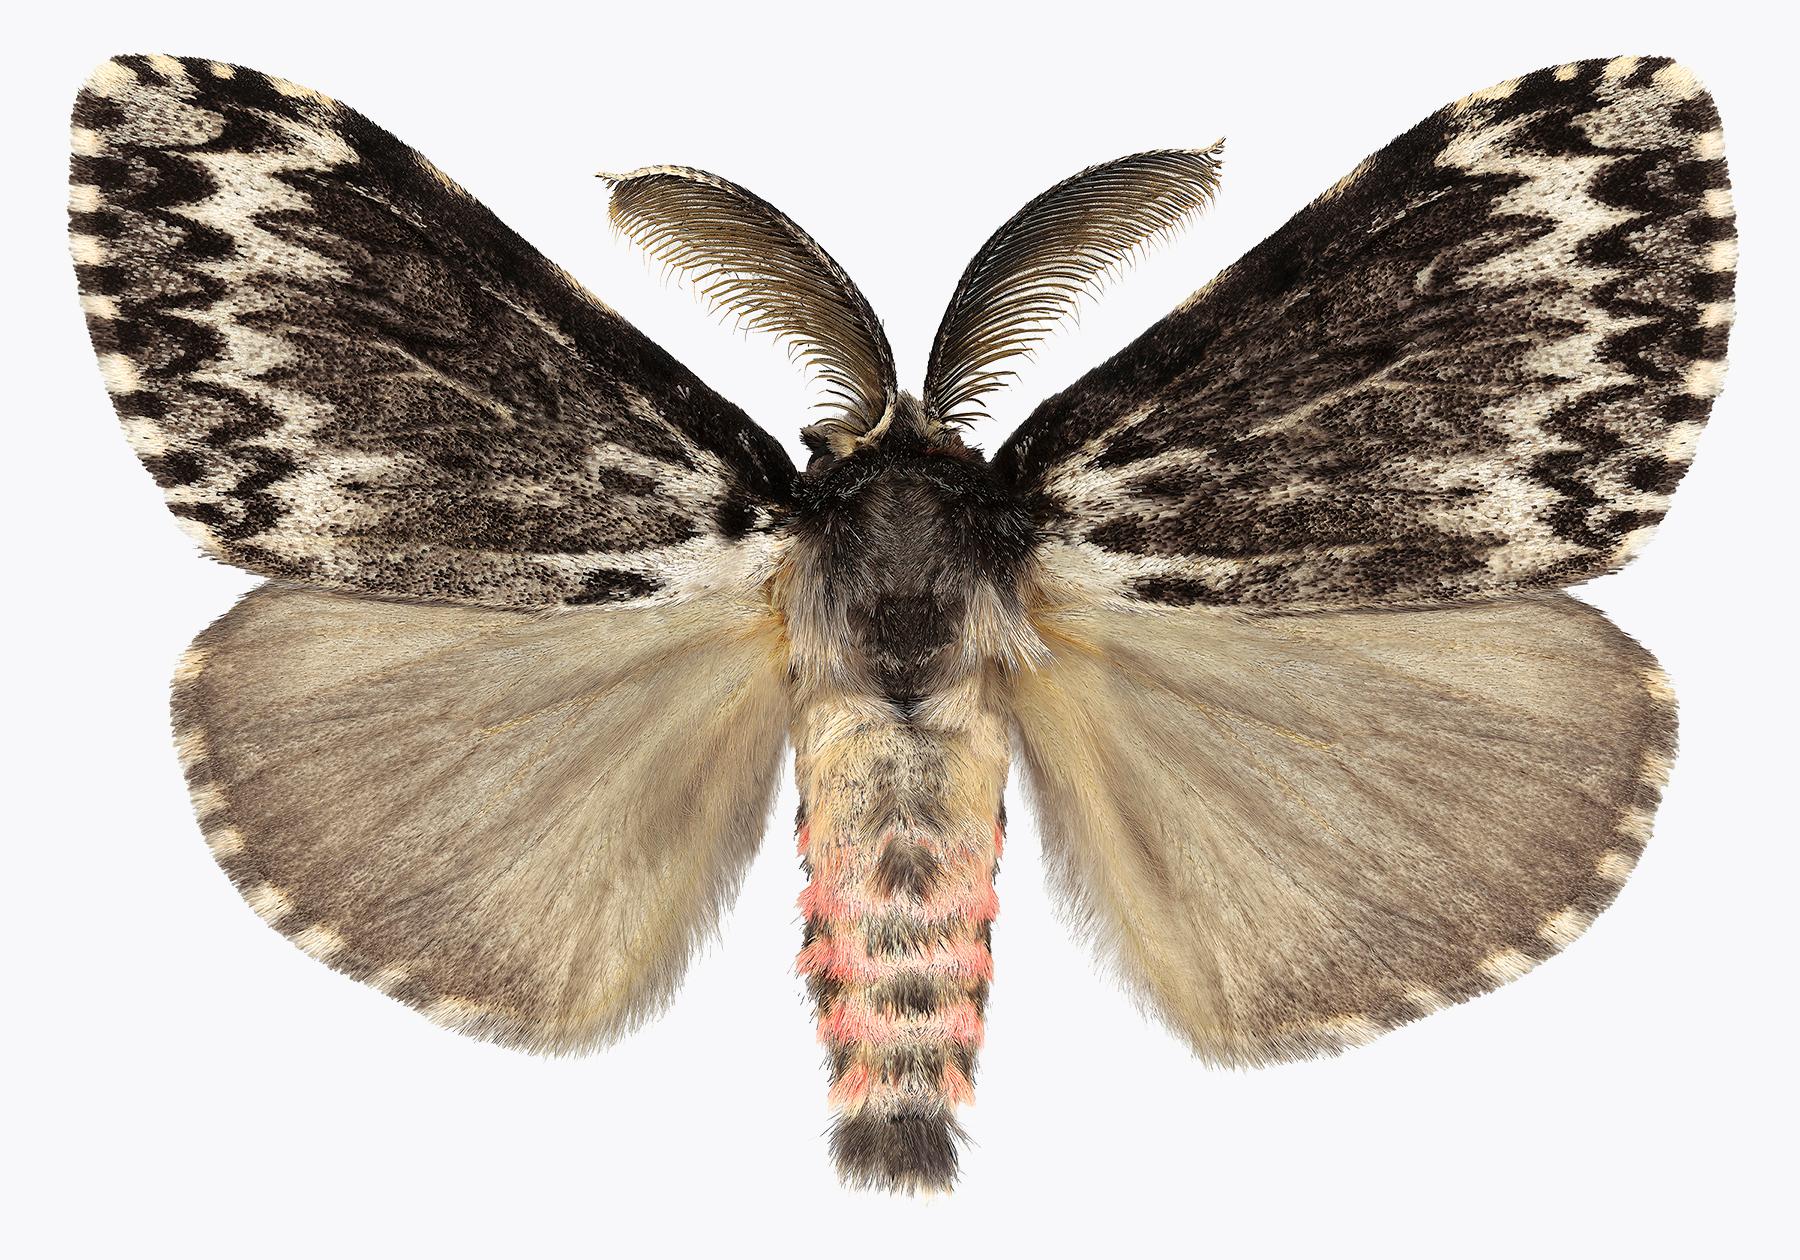 Joseph Scheer Color Photograph - Lymantria Species, Nature Photograph of Pink and Brown Moth on White Background